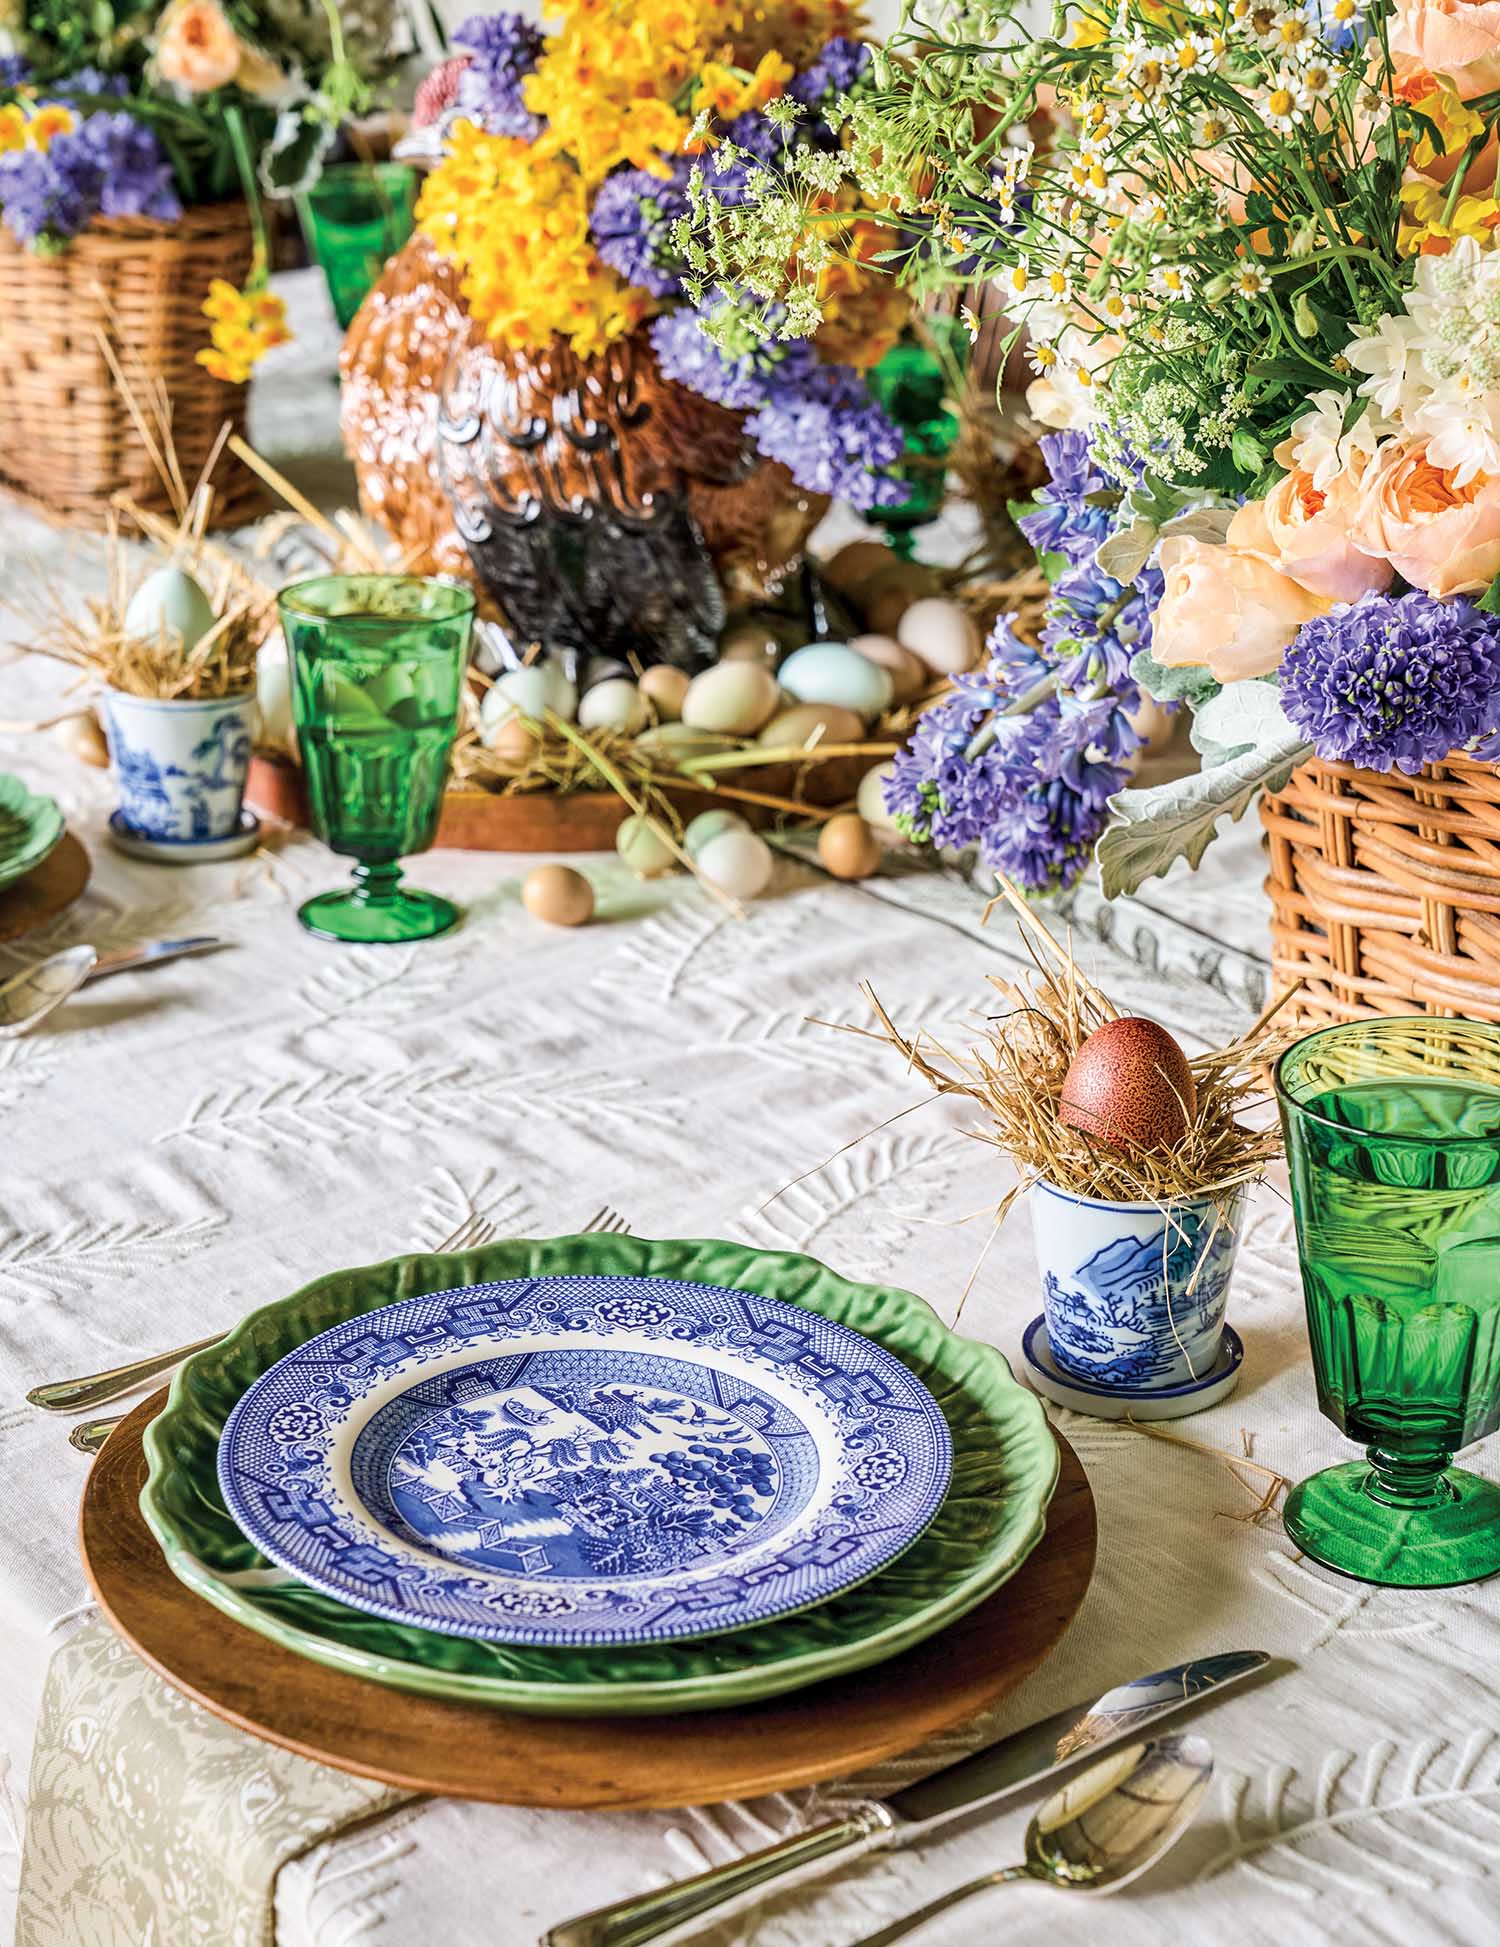 A blue plate is set at a table with spring flowers.